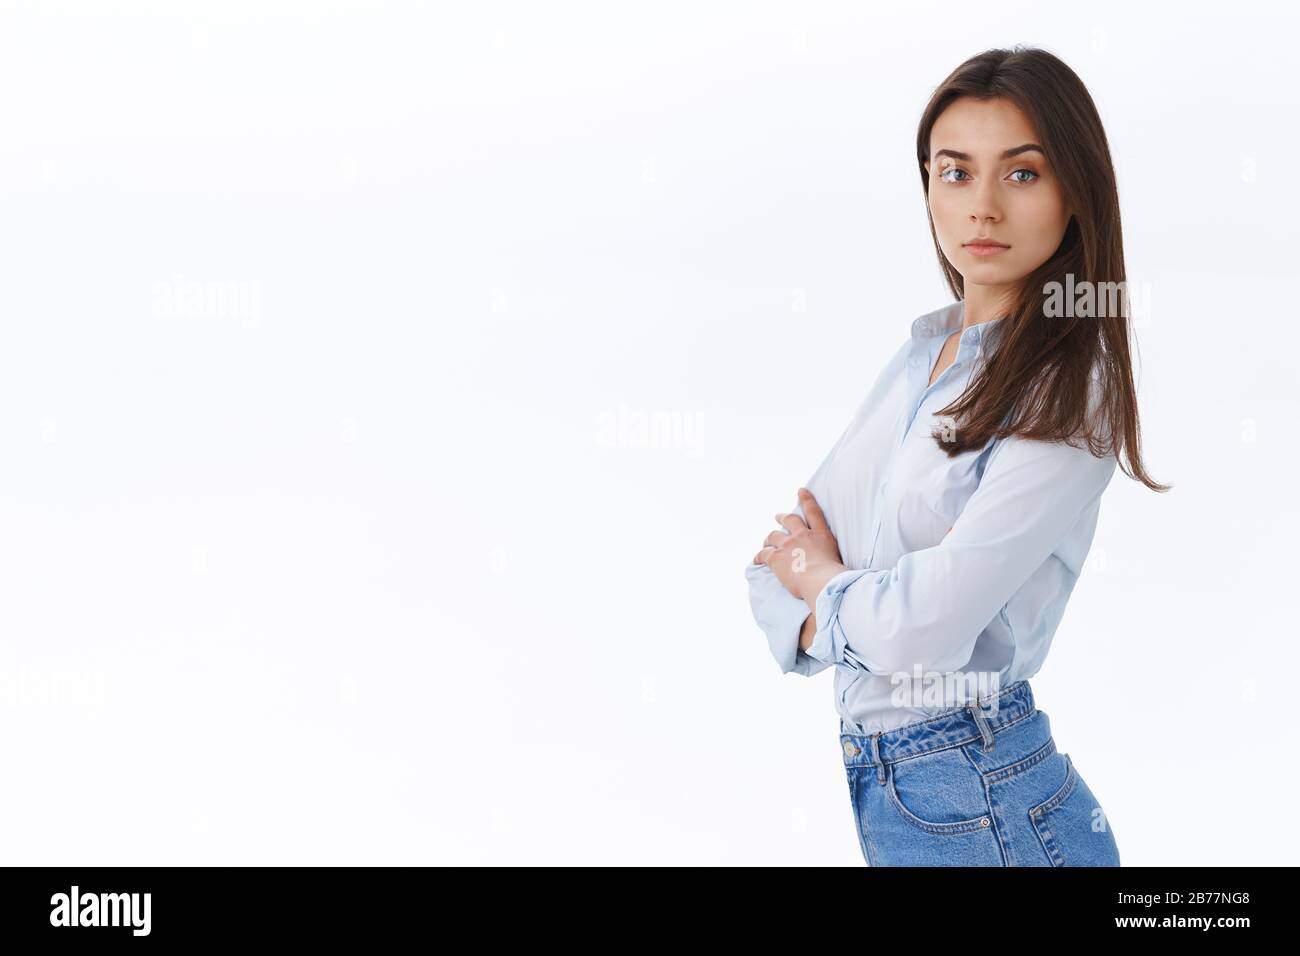 Confident stylish professional woman running own business looking assertive and ready, standing in profile turn face to came with sassy determined Stock Photo